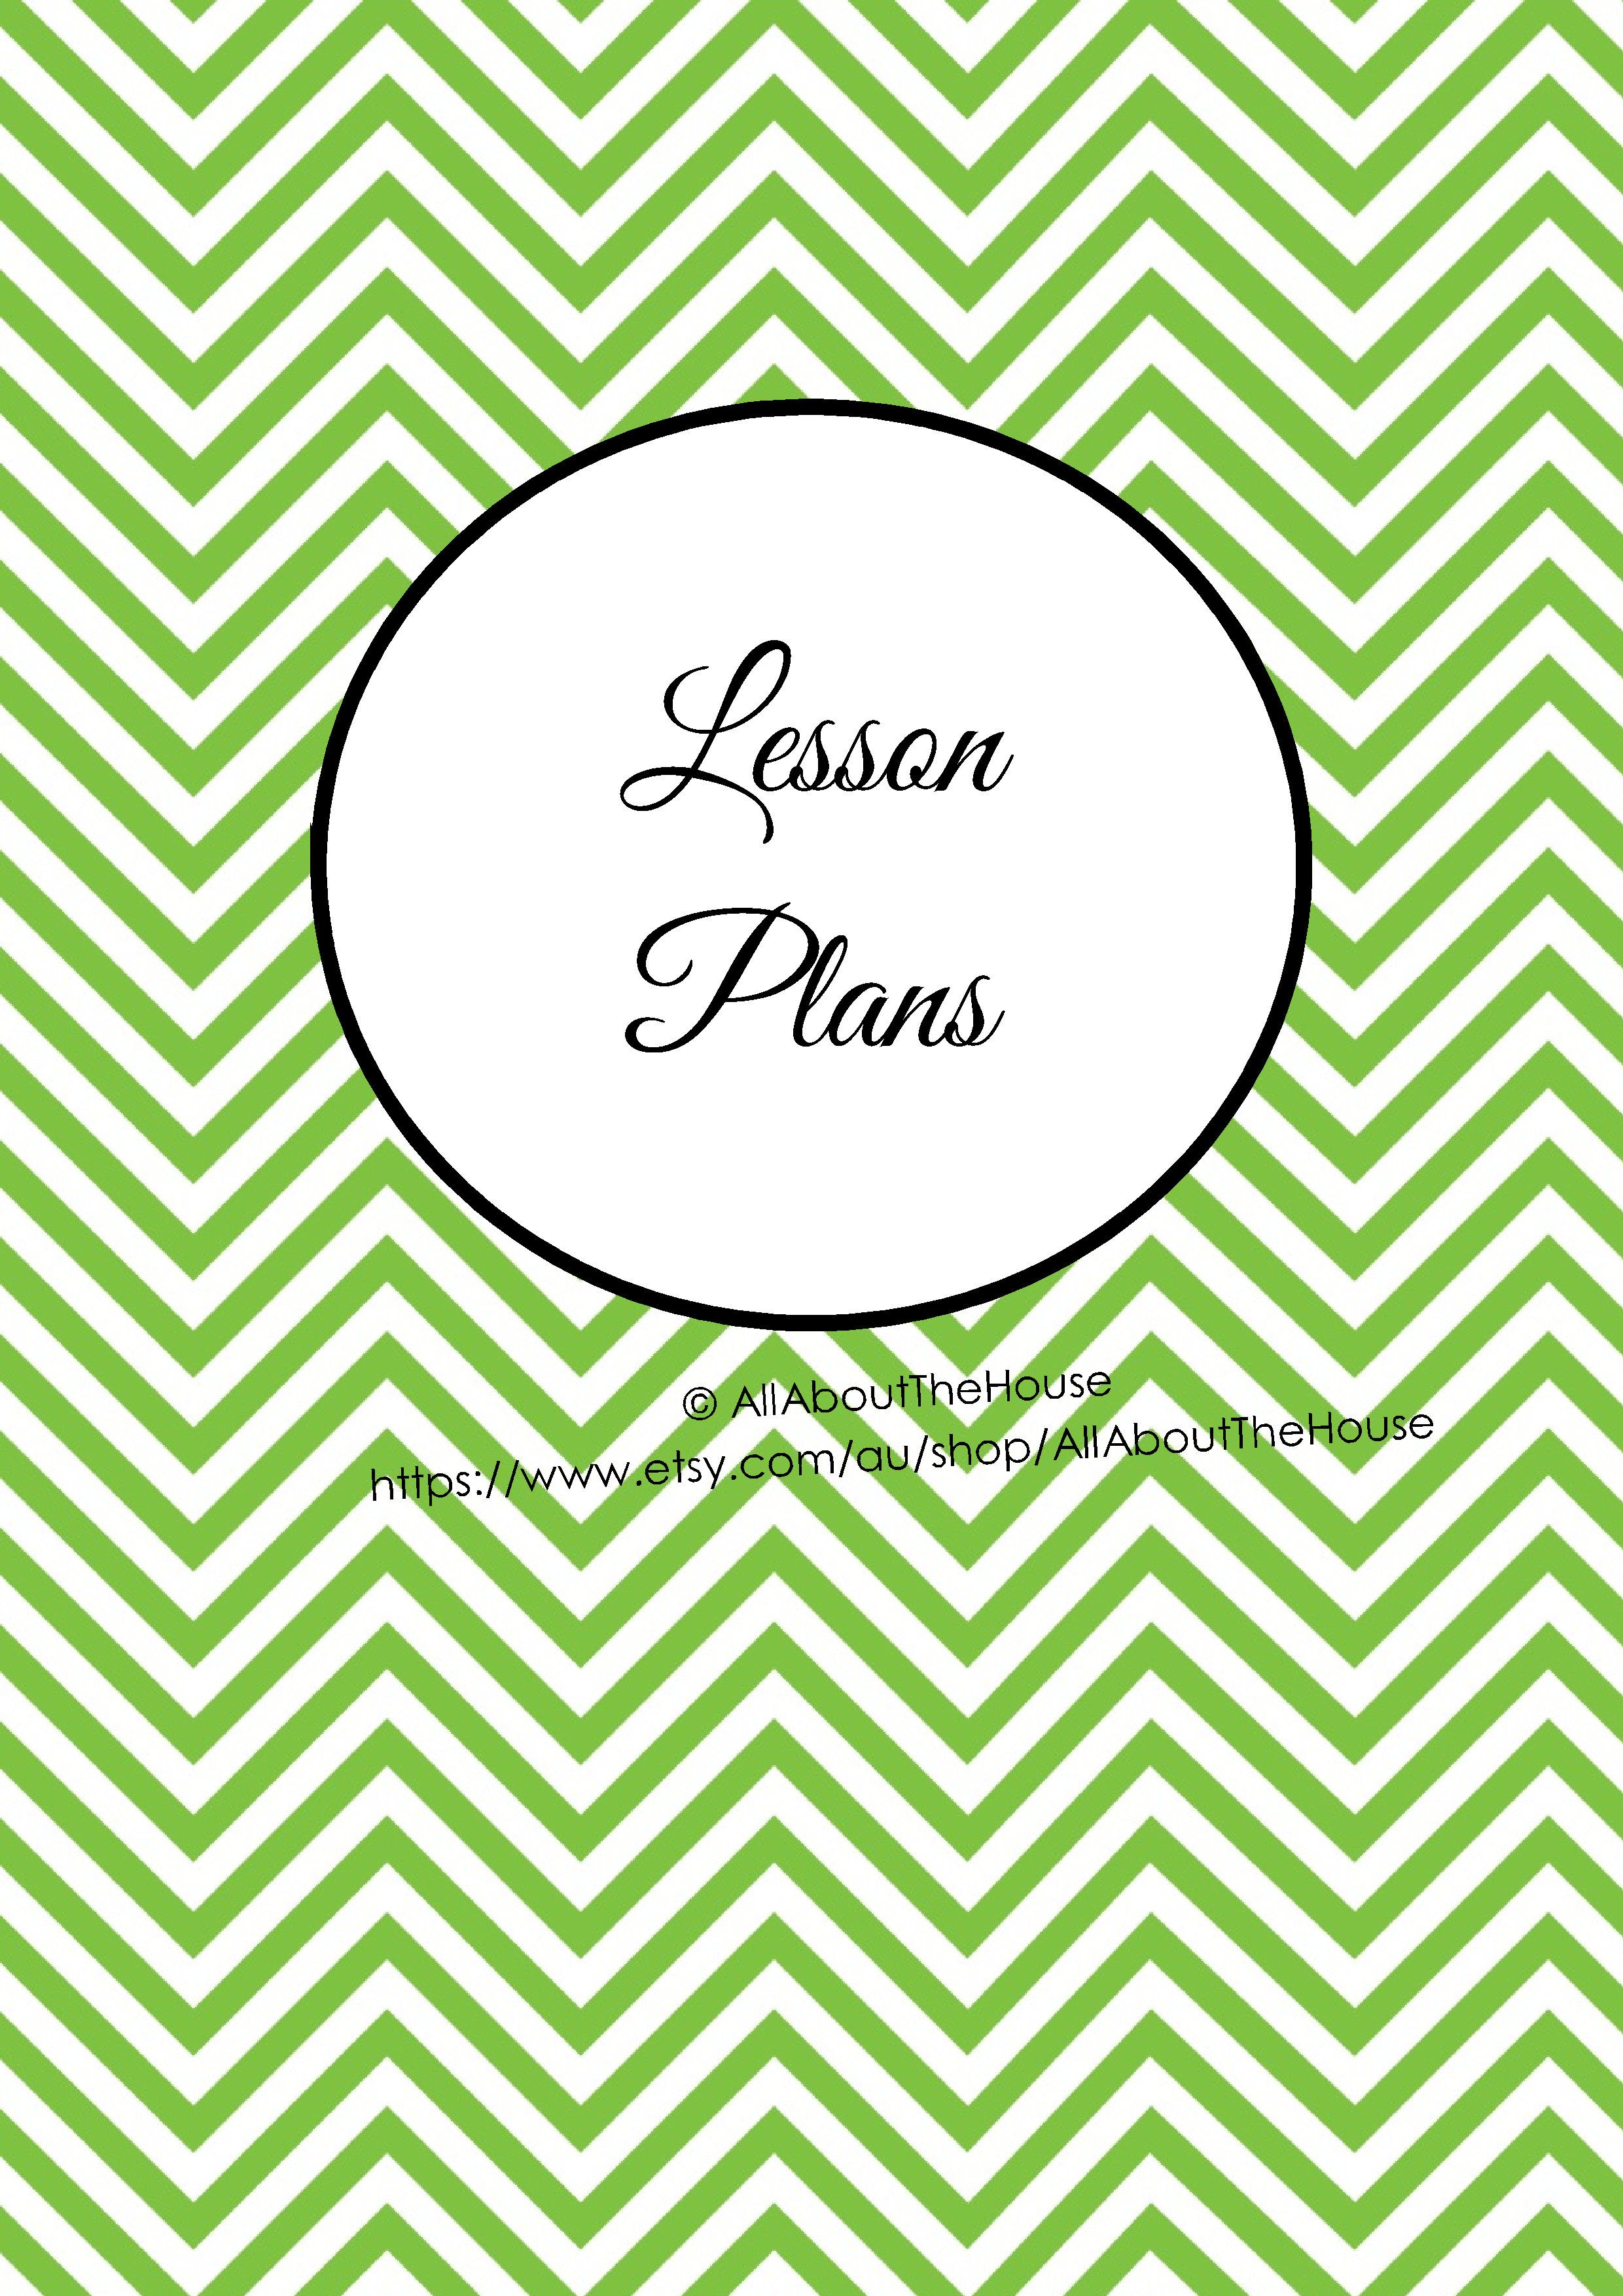 Lesson PLans Cover - Green